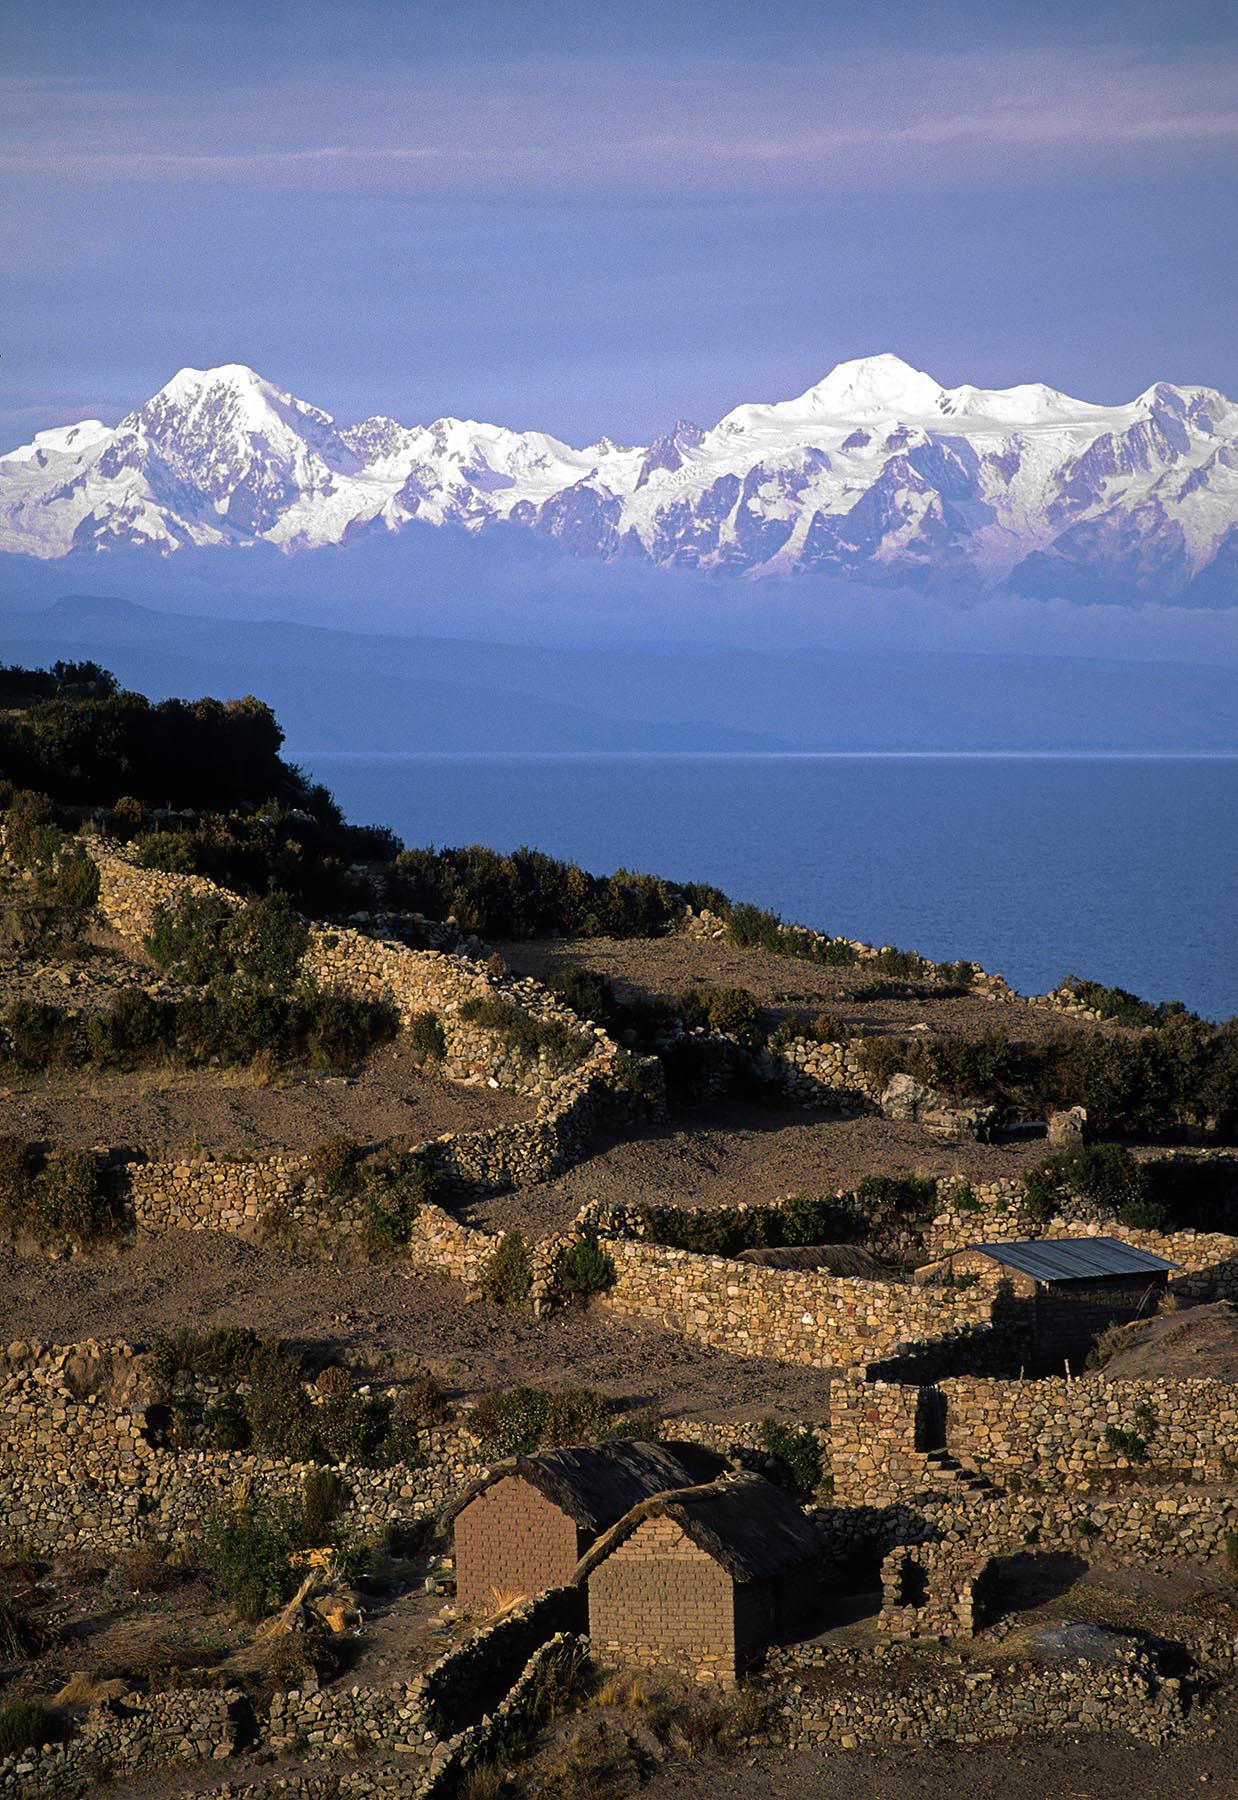 NEVADO ILLAMPU (7010 M) is visible behind the Village of CHALLAPAMPA on ISLE DEL SOL - LAKE TITICACA